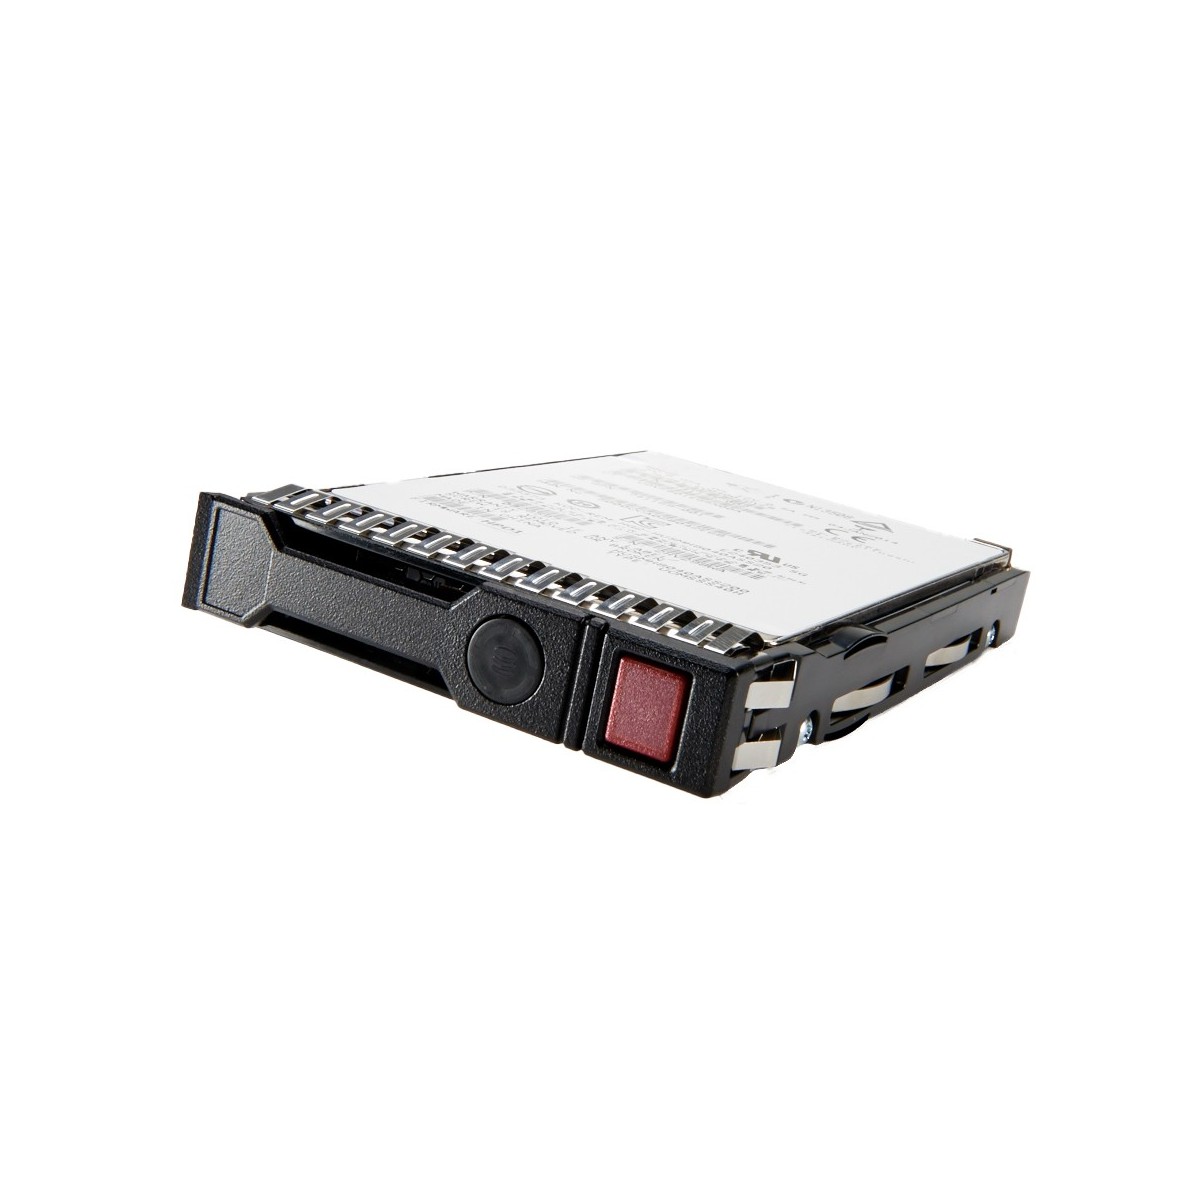 HPE 146GB SAS 15.000Rpm 2.5 inch - Hdd - Serial Attached SCSI (SAS)